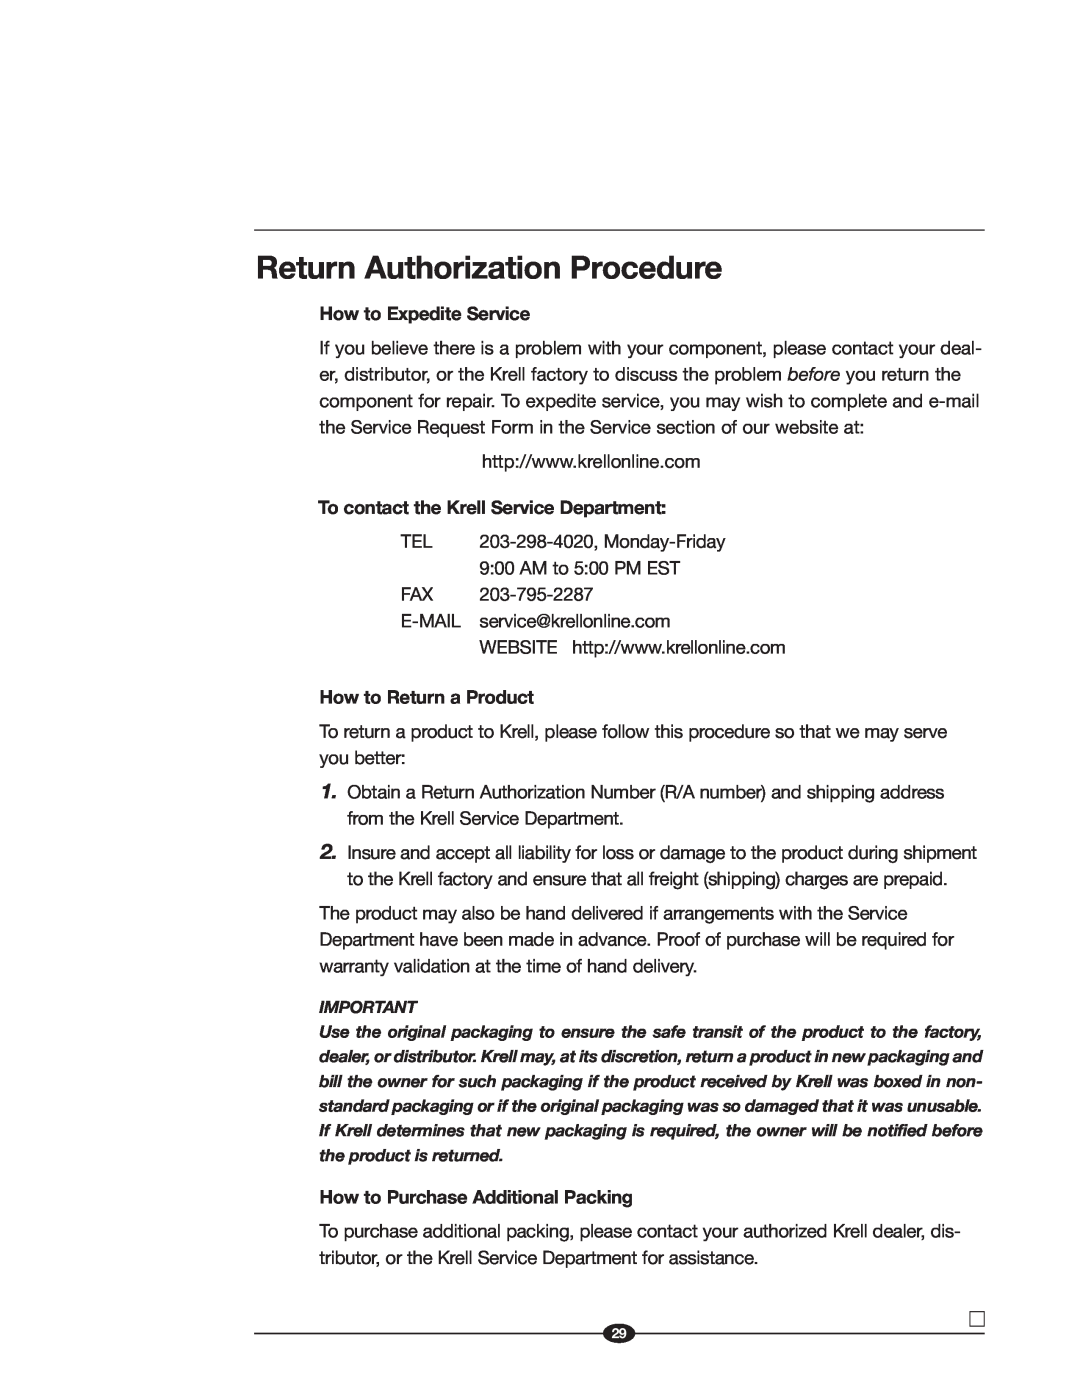 Krell Industries Evolution manual Return Authorization Procedure, How to Expedite Service, How to Return a Product 